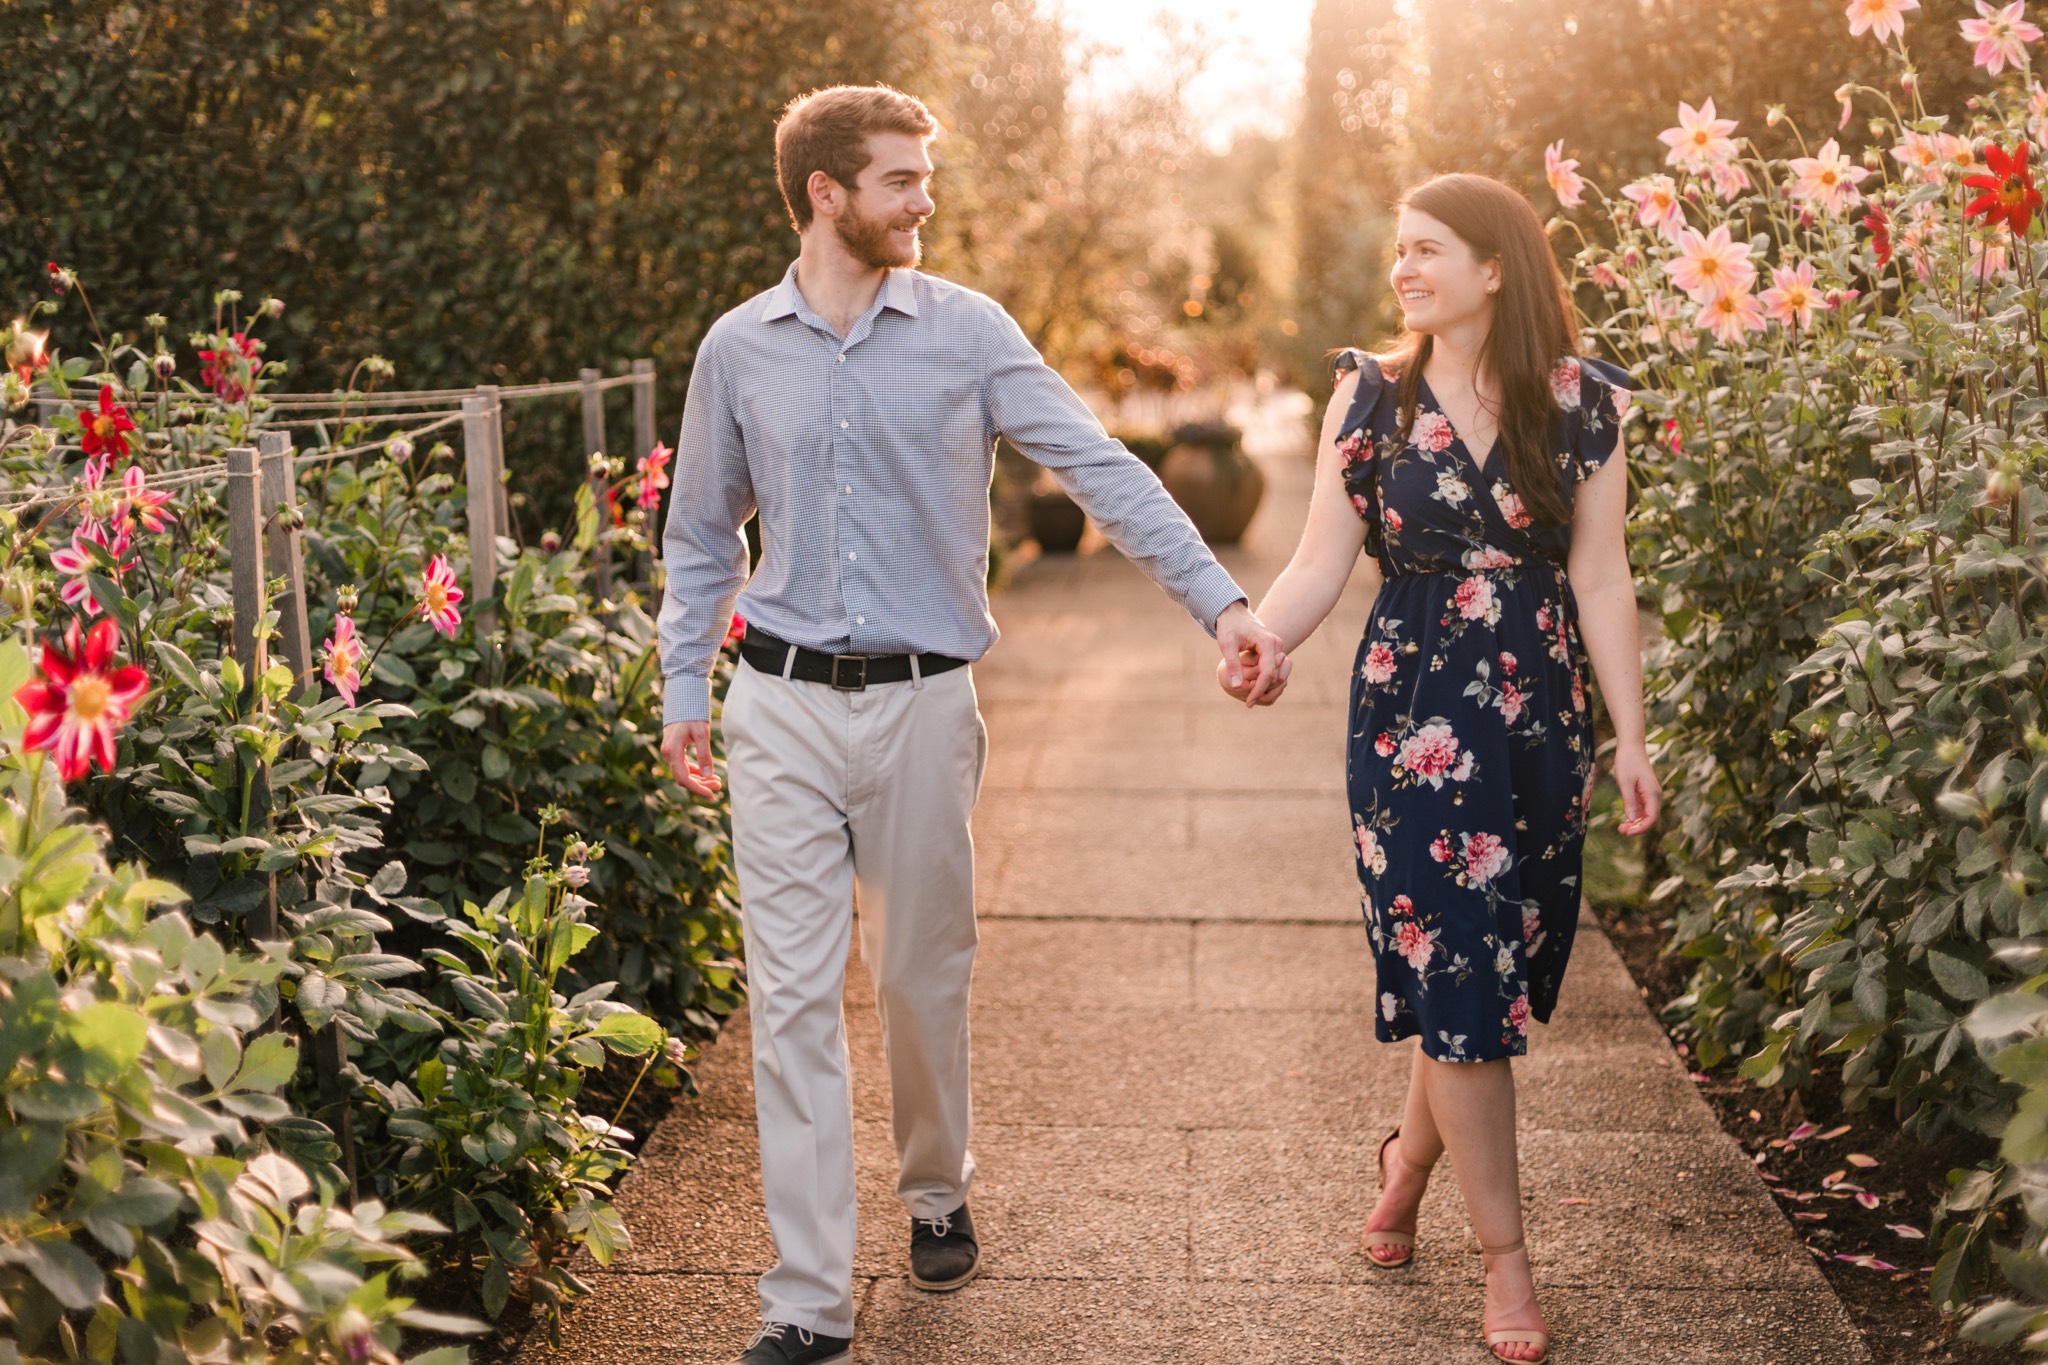 Longwood Gardens Engagement Session in the Fall - John & Amy - Josiah & Steph Photography